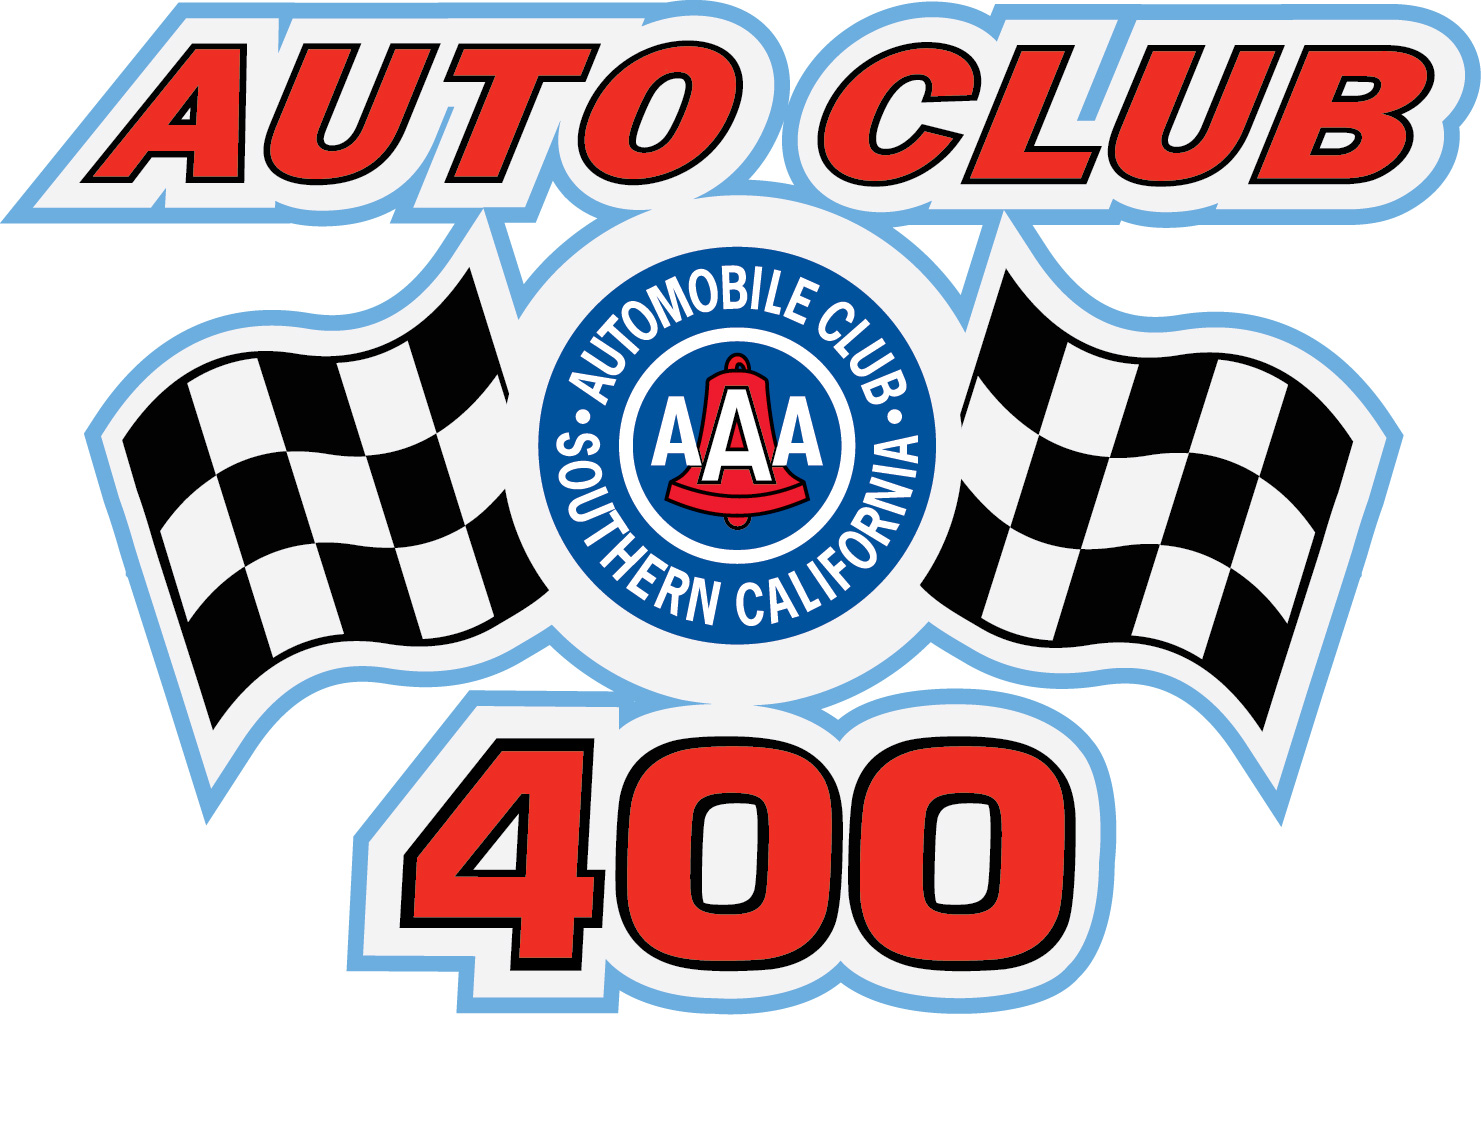 NASCAR at Fontana: Starting Lineup, green flag start time and tv info for Auto Club 400